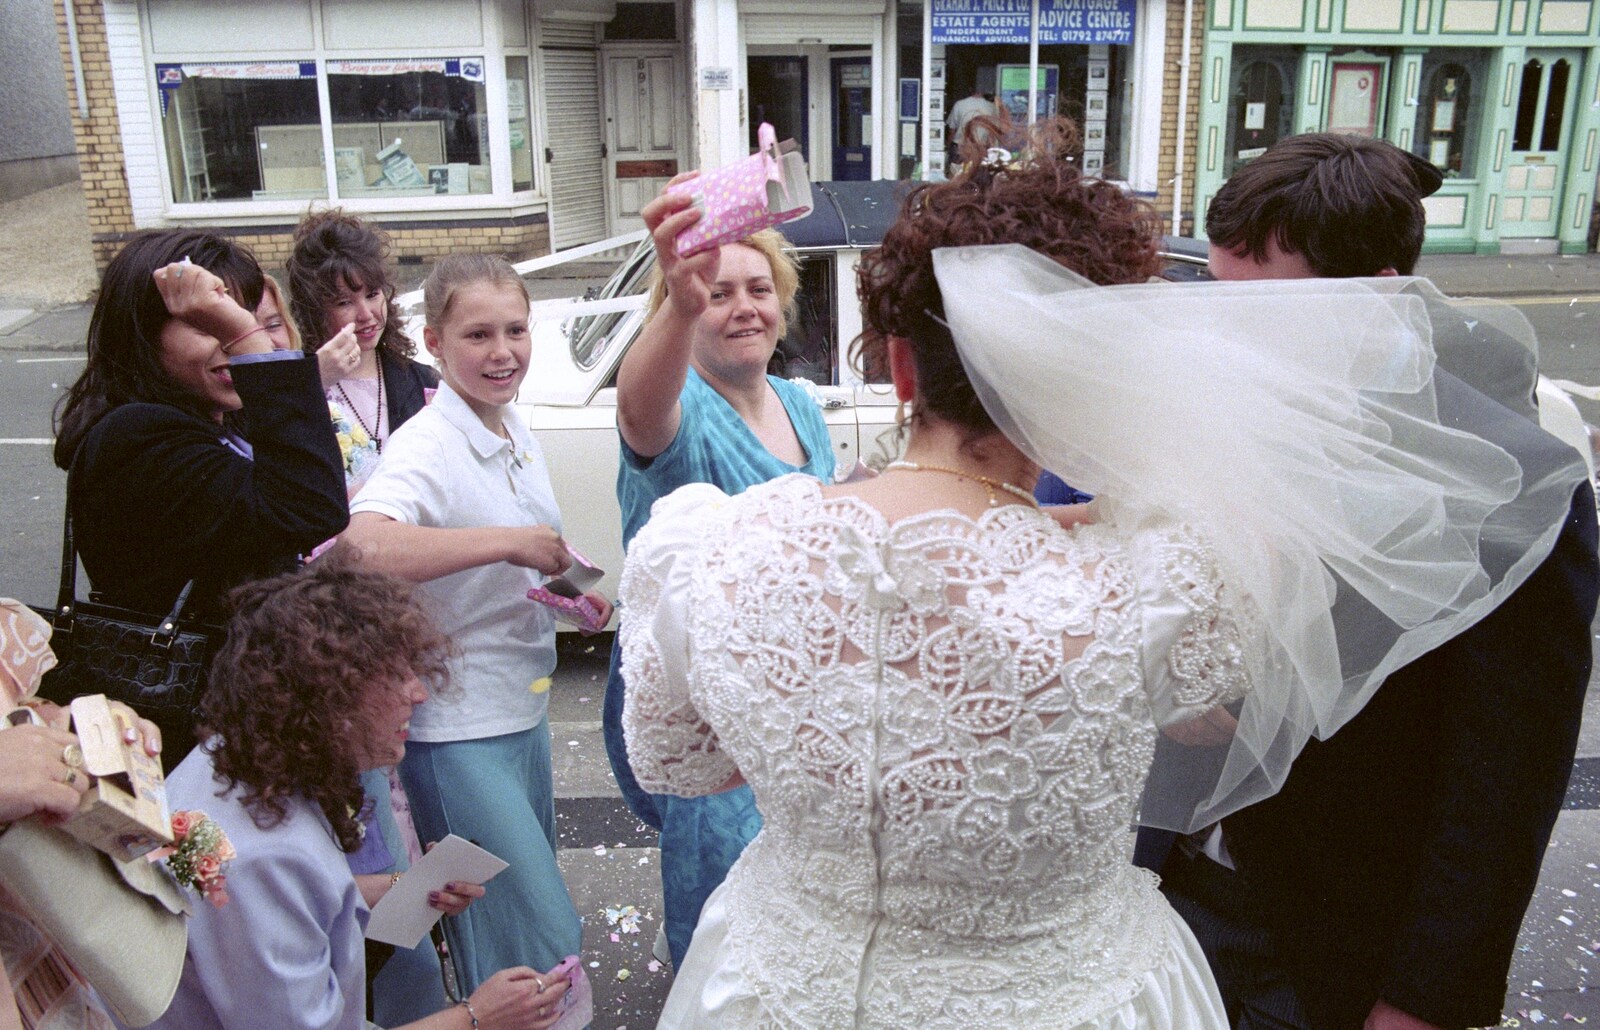 Riki's Wedding, Treboeth, Swansea - 7th May 1996: Boxes of confetti come out